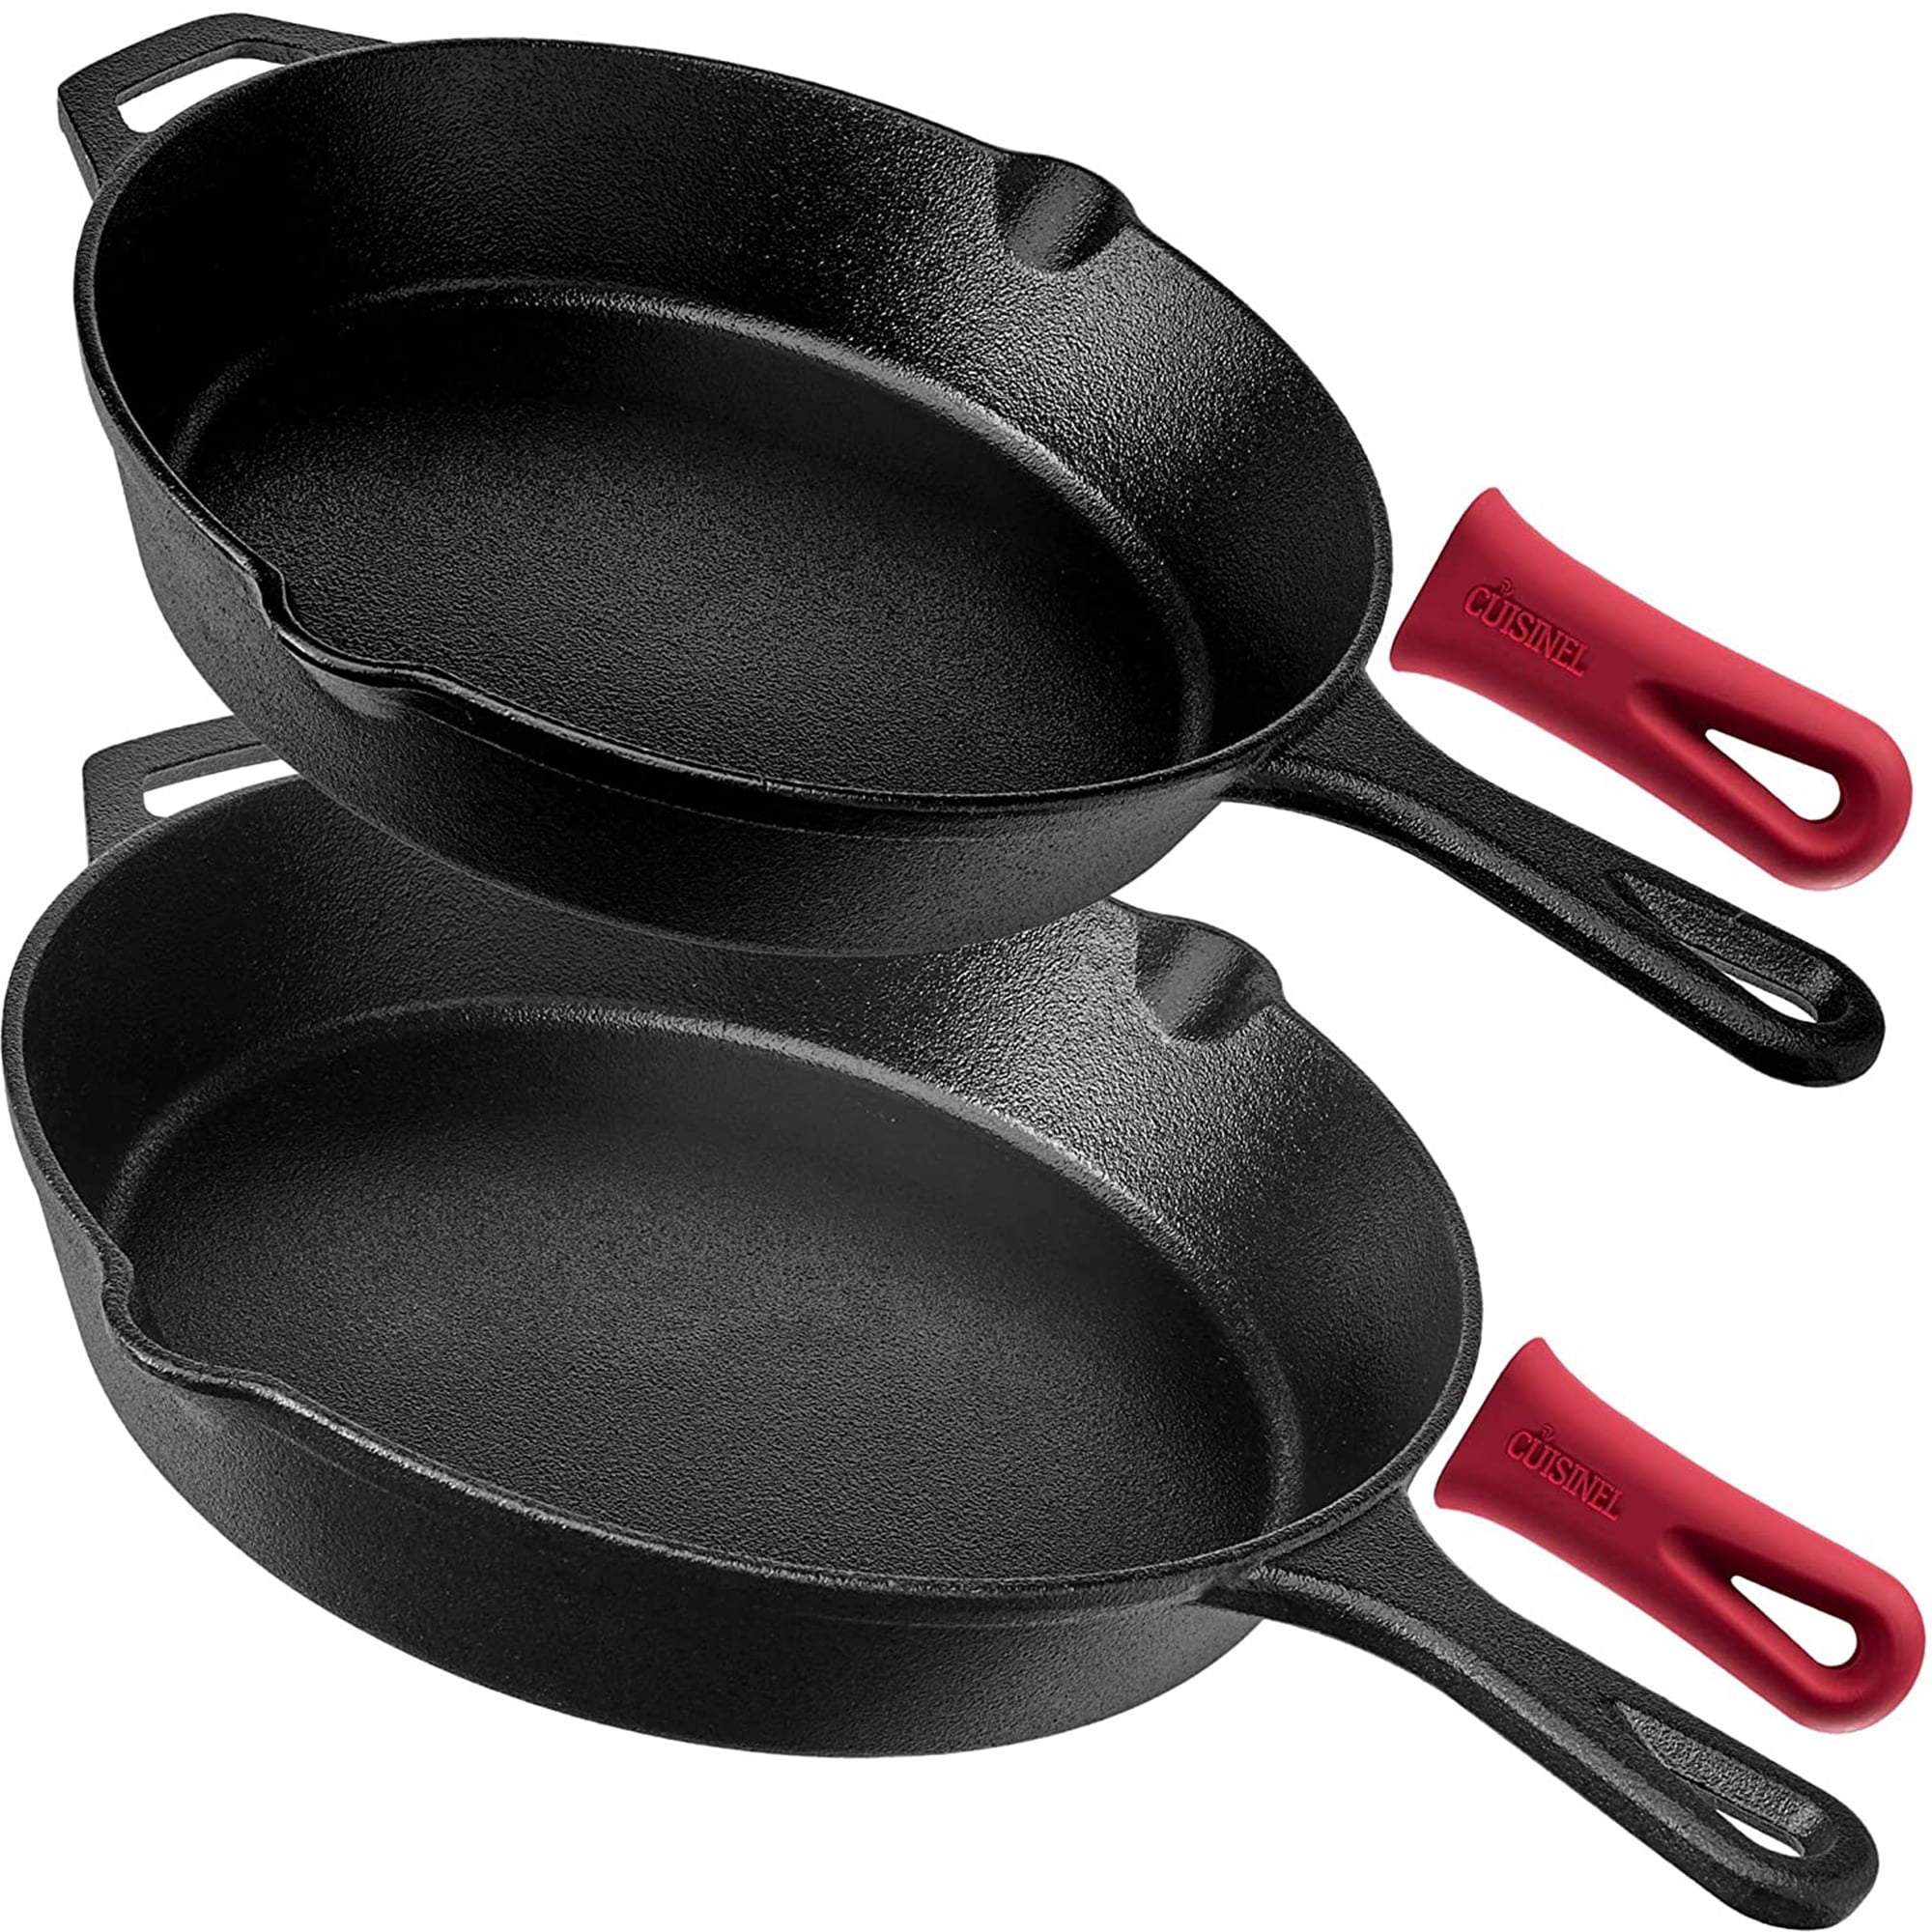 OXO Obsidian Pre-Seasoned Carbon Steel, 8 Frying Pan Skillet with  Removable Silicone Handle Holder, Induction, Oven Safe, Black